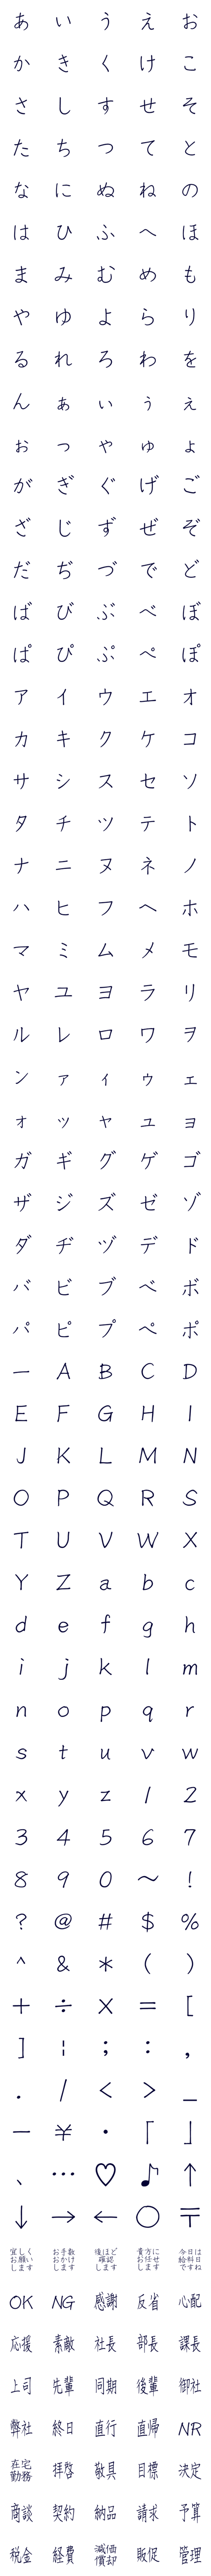 [LINE絵文字]DFてがき誠 フォント絵文字の画像一覧